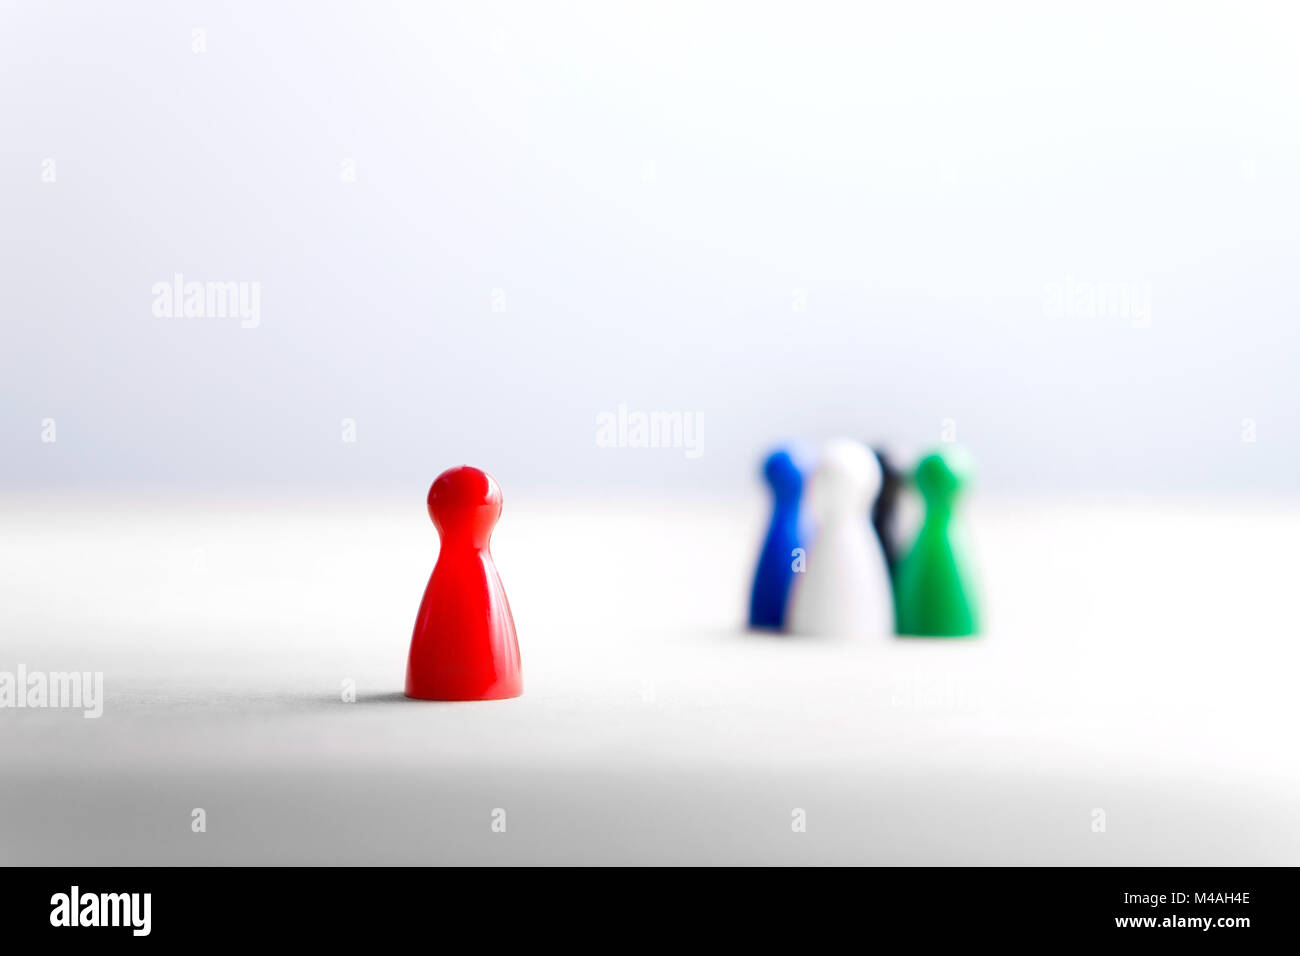 Being alone, outsider and outcast. Racism, discrimination, bullying and social isolation concept. Board game pawns on wooden table. Stock Photo